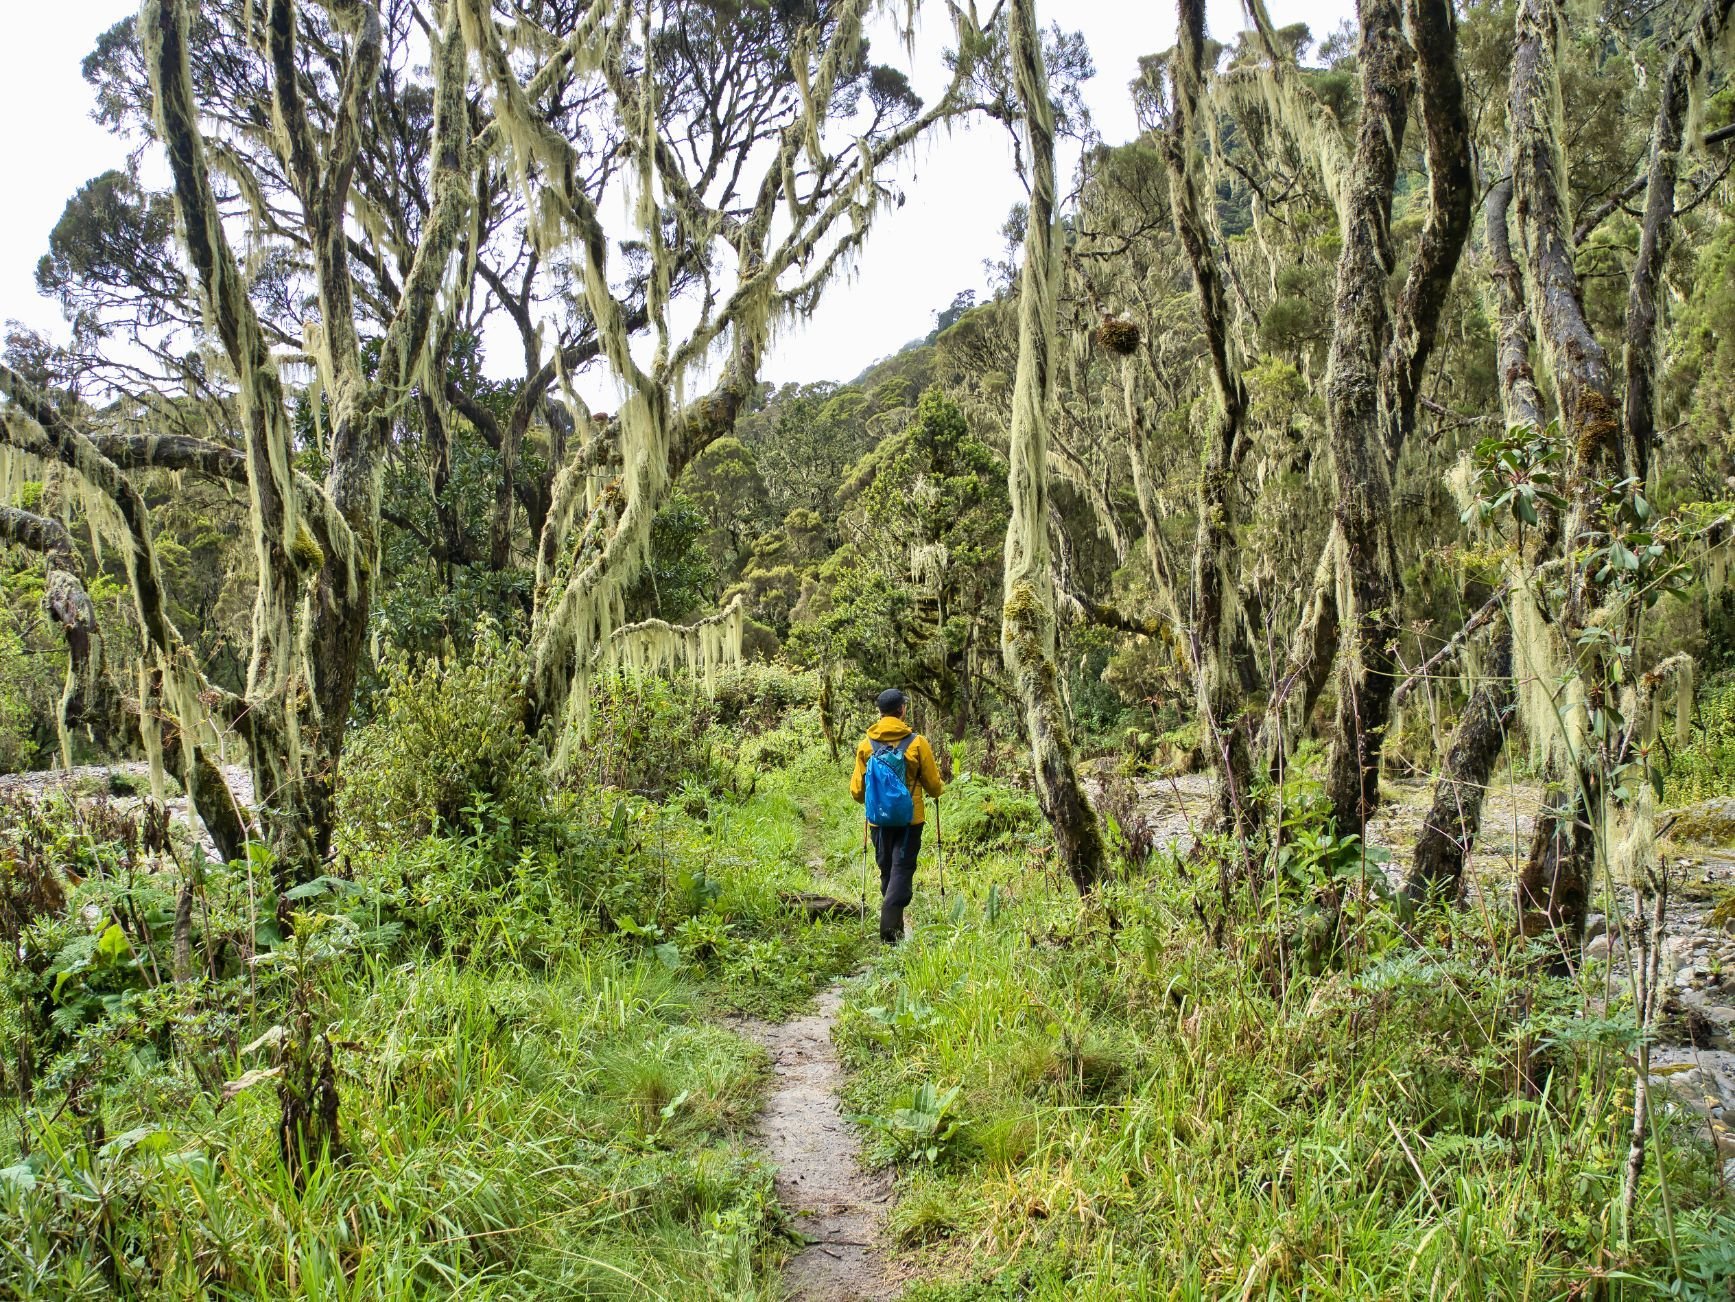 A hiker walks down a forested path in Uganda's Rwenzori Mountains Photo: Getty